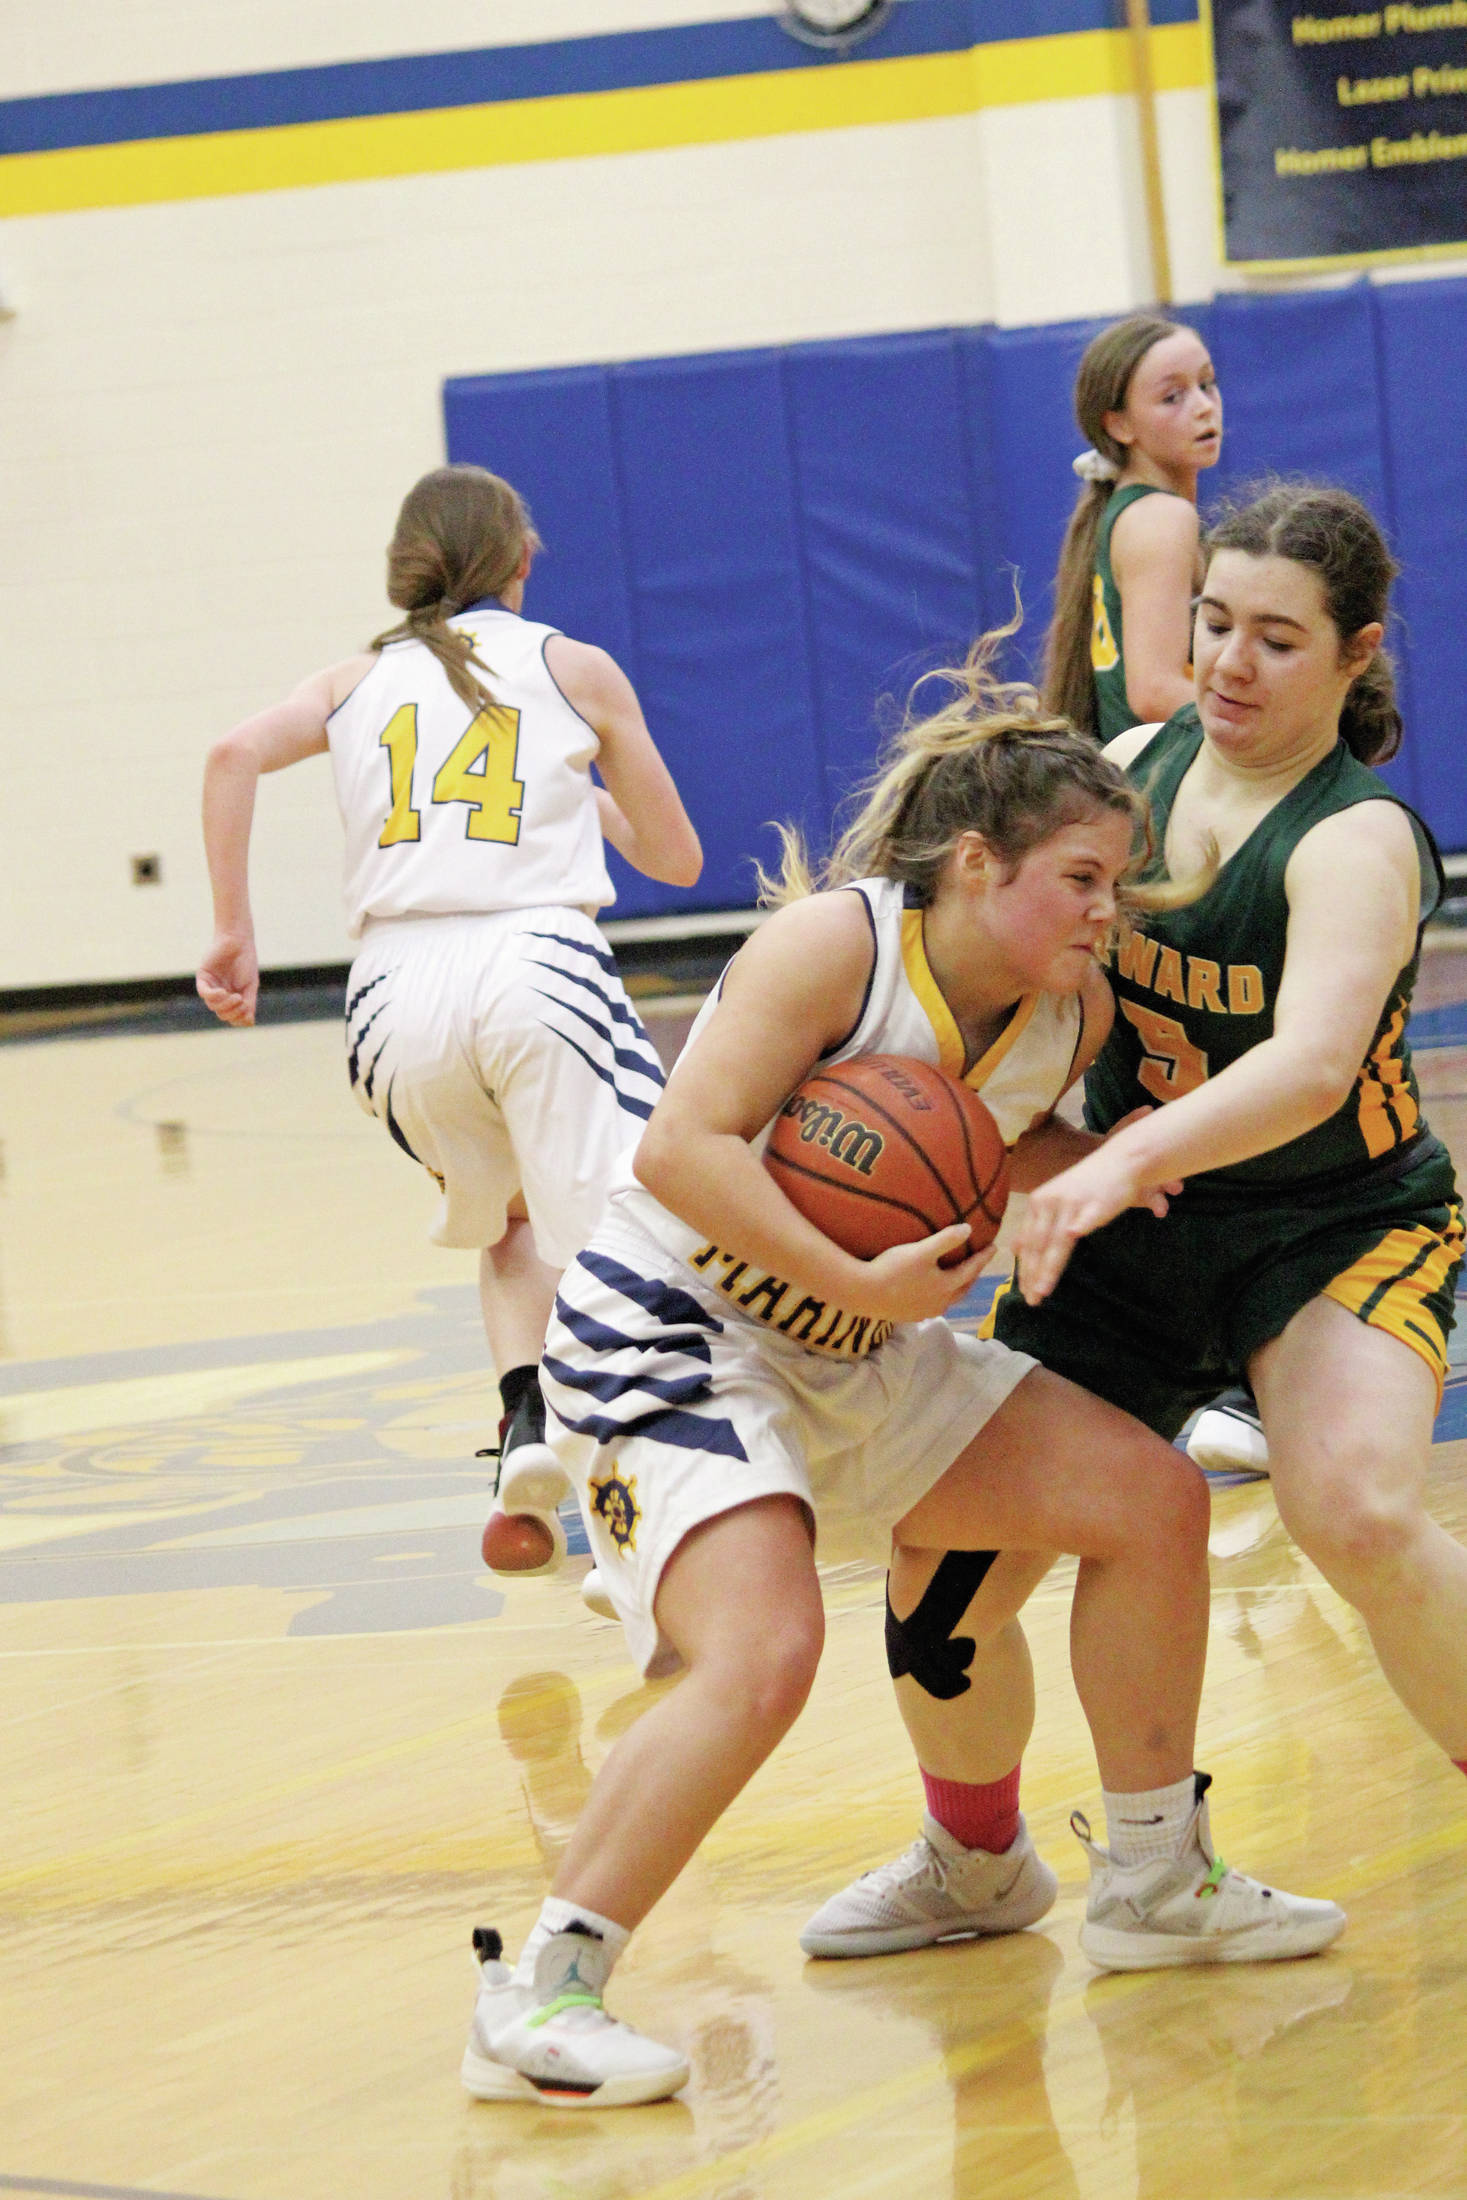 Homer’s Rylee Doughty wrestles the ball away from Seward’s Sophia Dow during a Saturday, Jan. 11, 2020 basketball game between the two schools at the Alice Witte Gymnasium in Homer, Alaska. (Photo by Megan Pacer/Homer News)